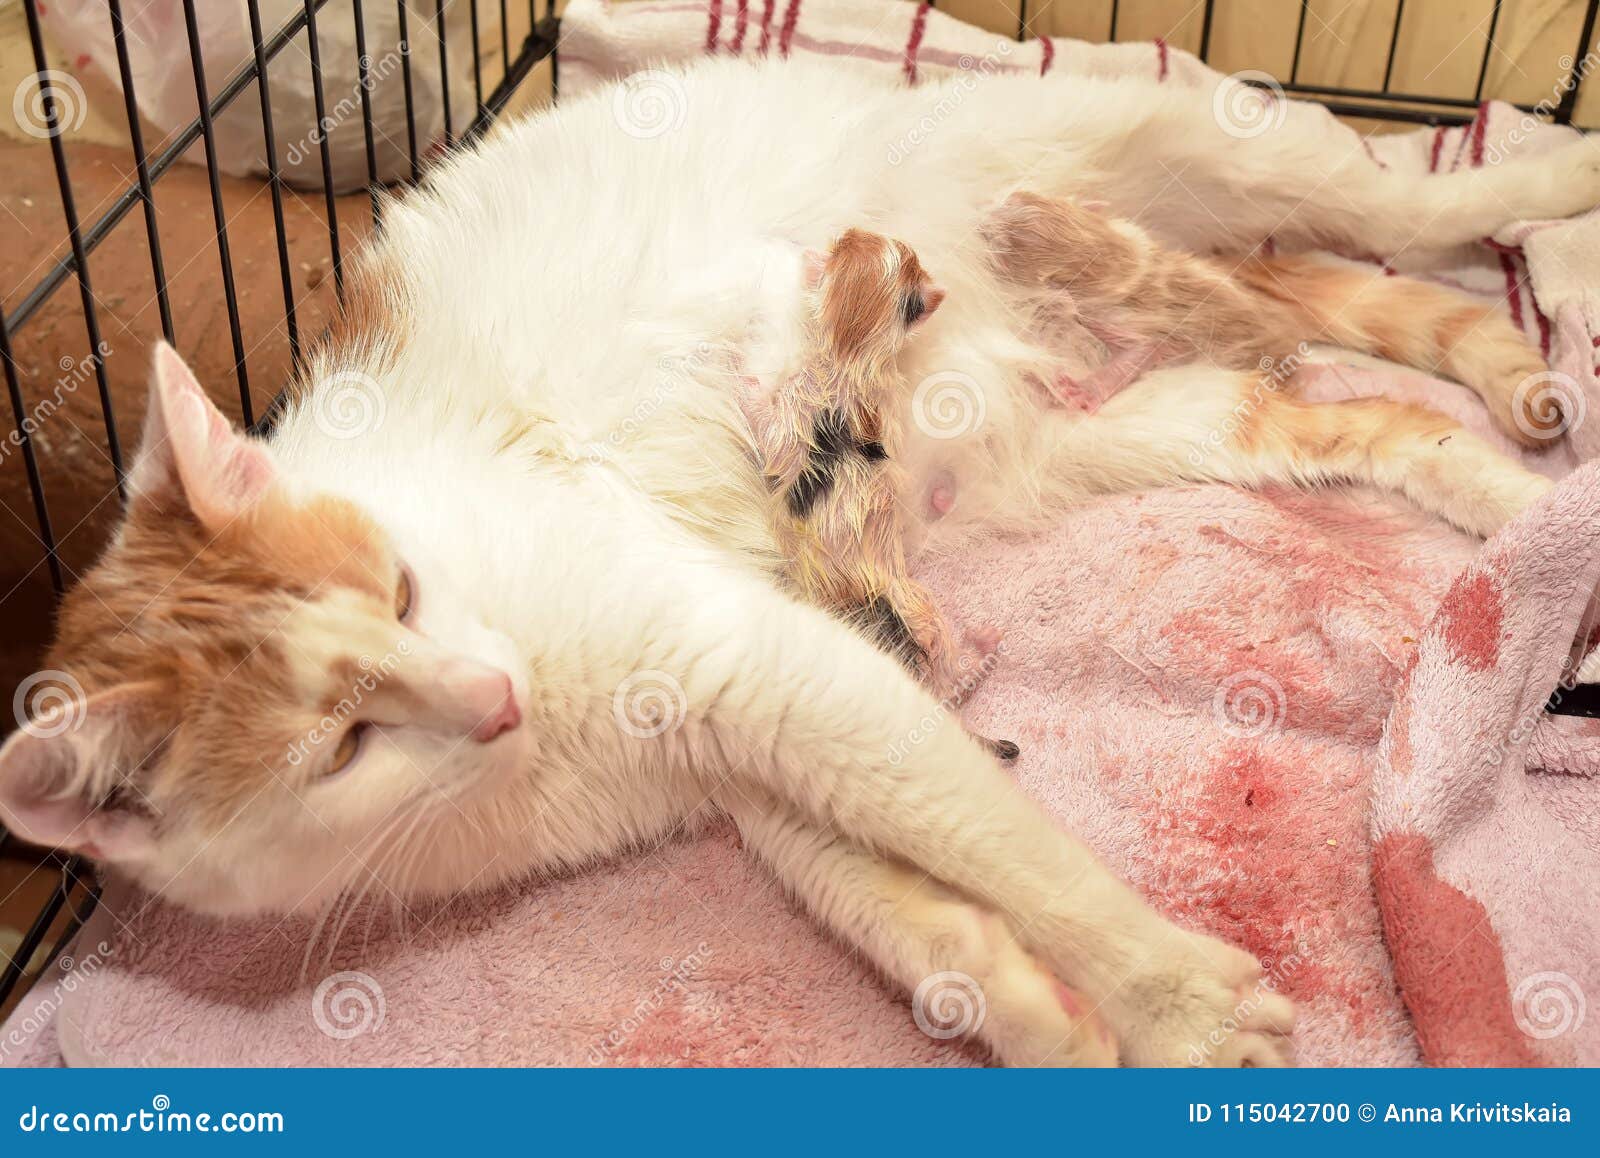 Female cat give birth stock photo. Image of domestic 115042700